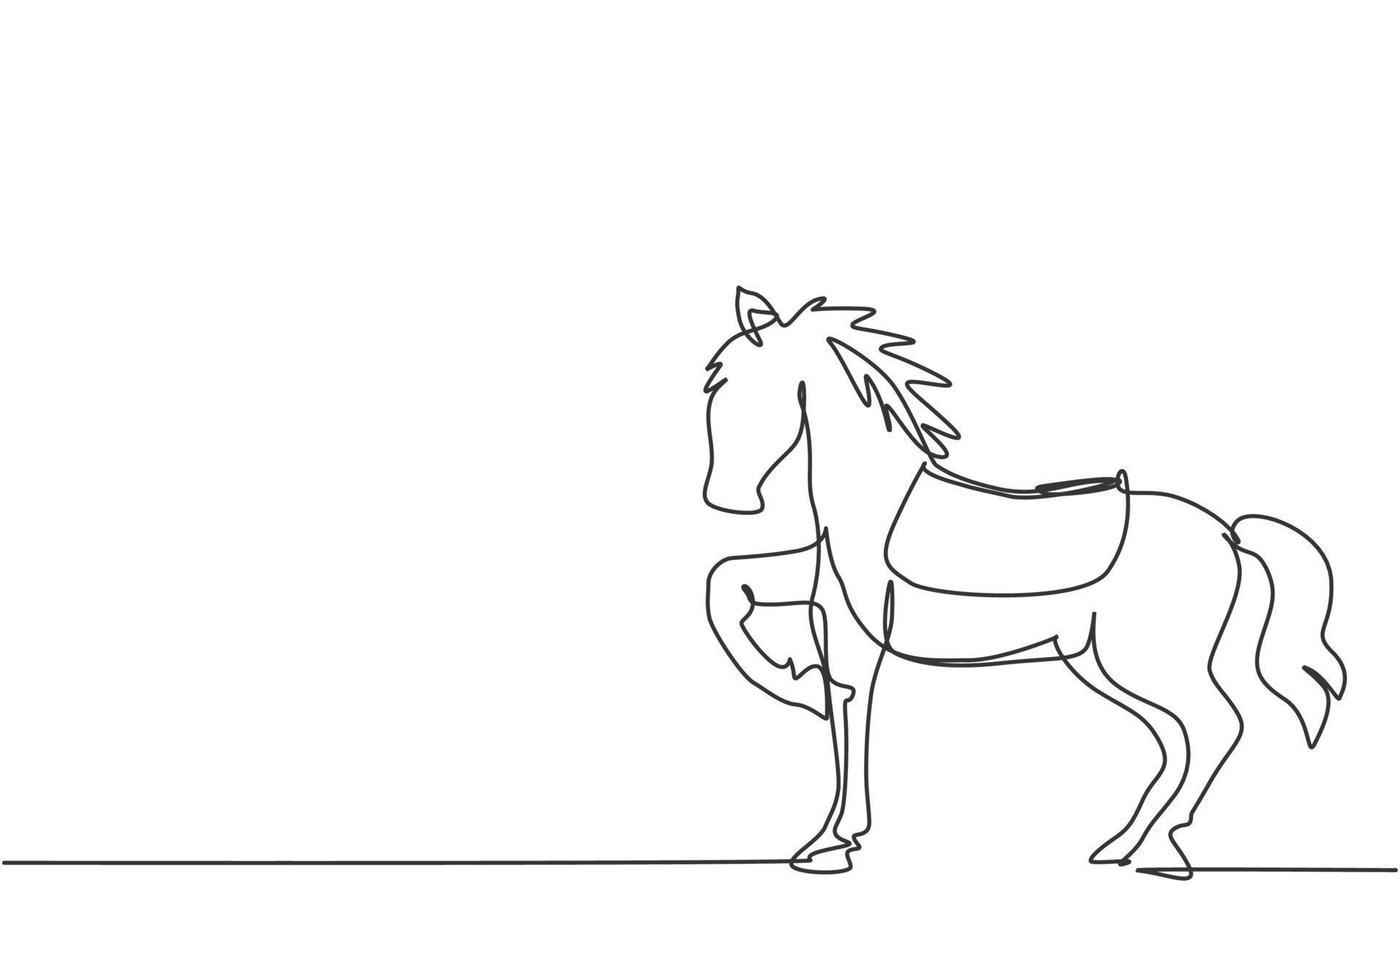 Continuous one line drawing a circus horse stands on the show arena, lifting one of its legs while preparing to perform an attraction. Trained horse. One line draw design vector graphic illustration.